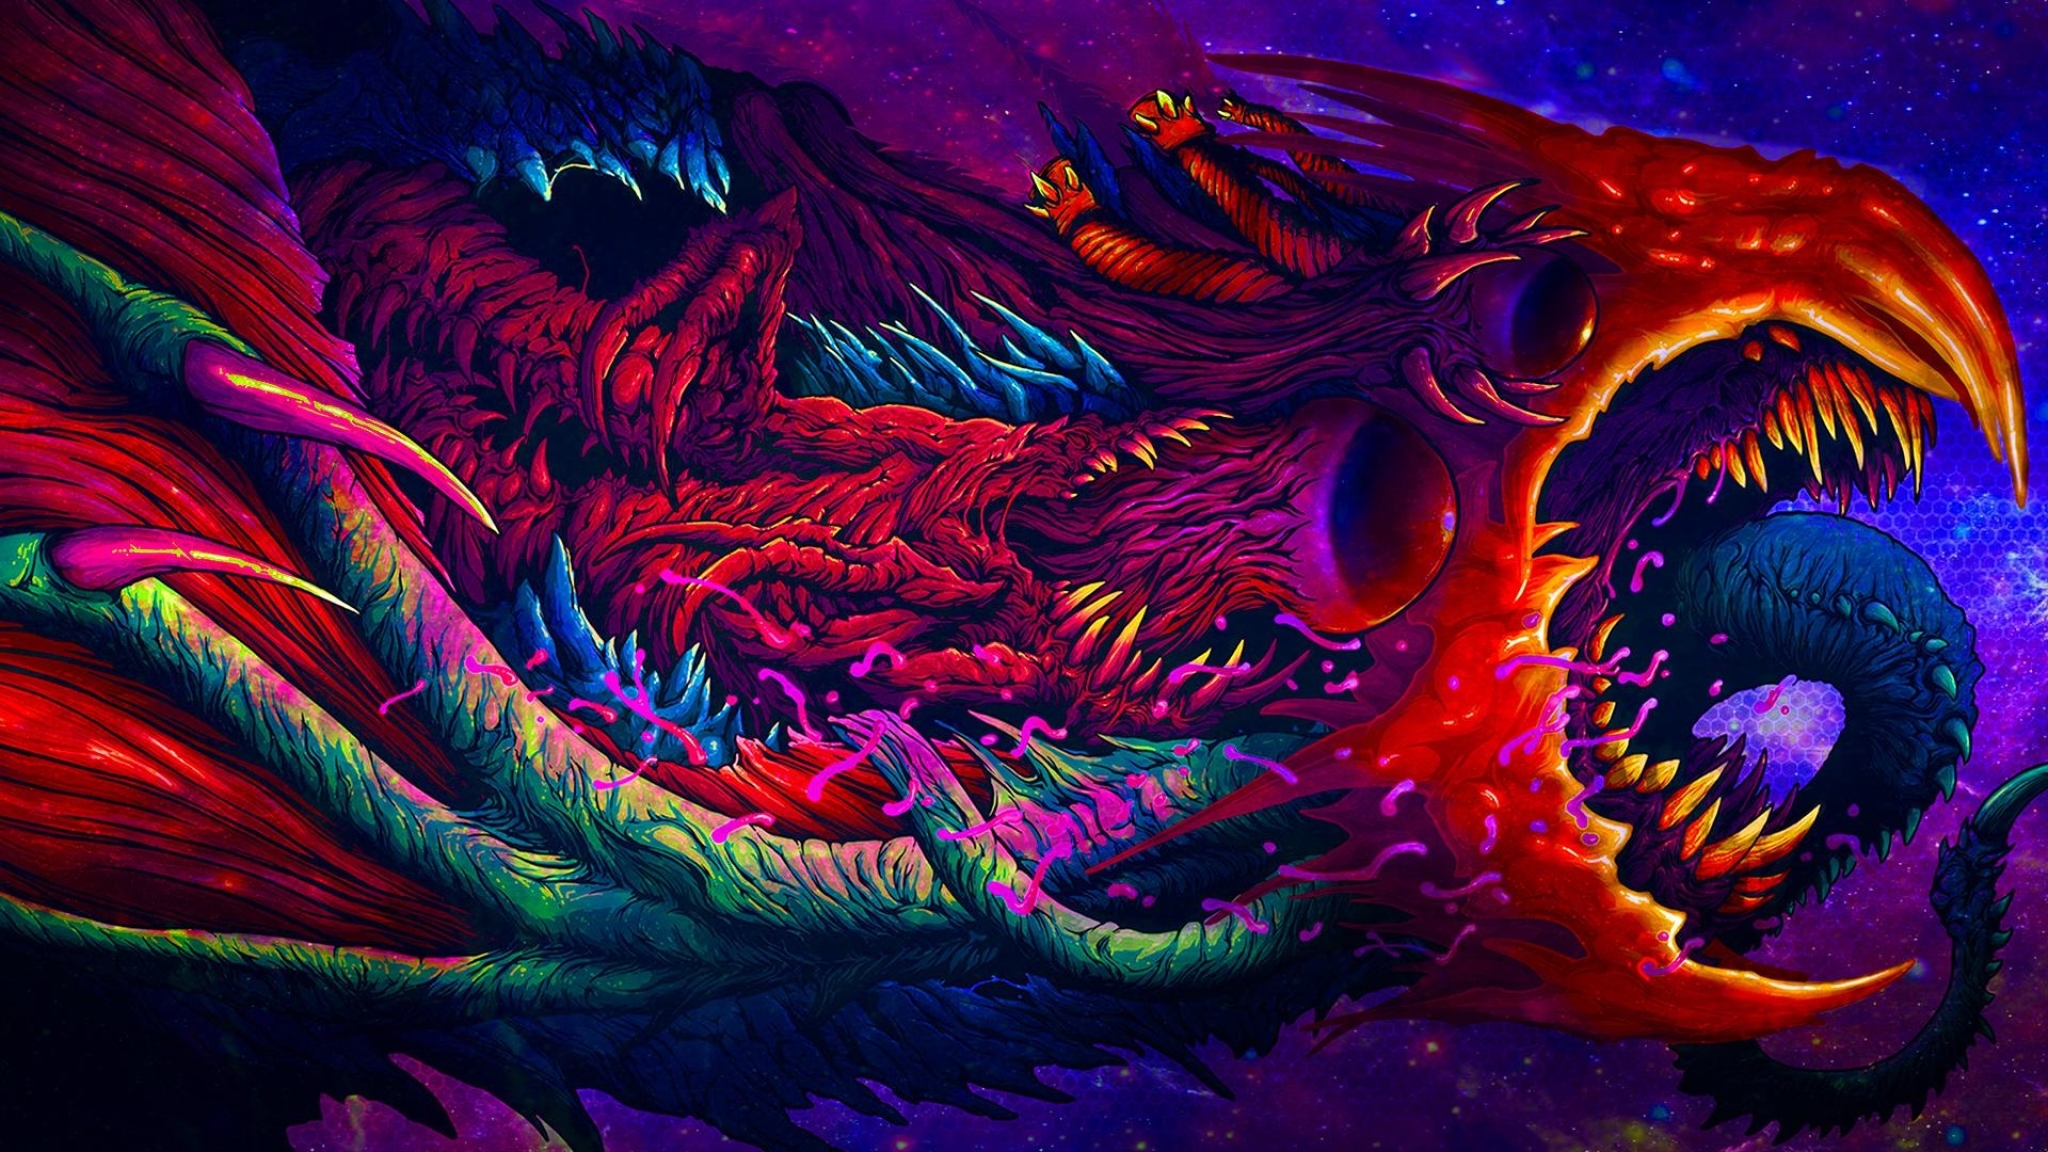 48x1152 Hyper Beast Csgo Art Cool 48x1152 Resolution Wallpaper Hd Games 4k Wallpapers Images Photos And Background